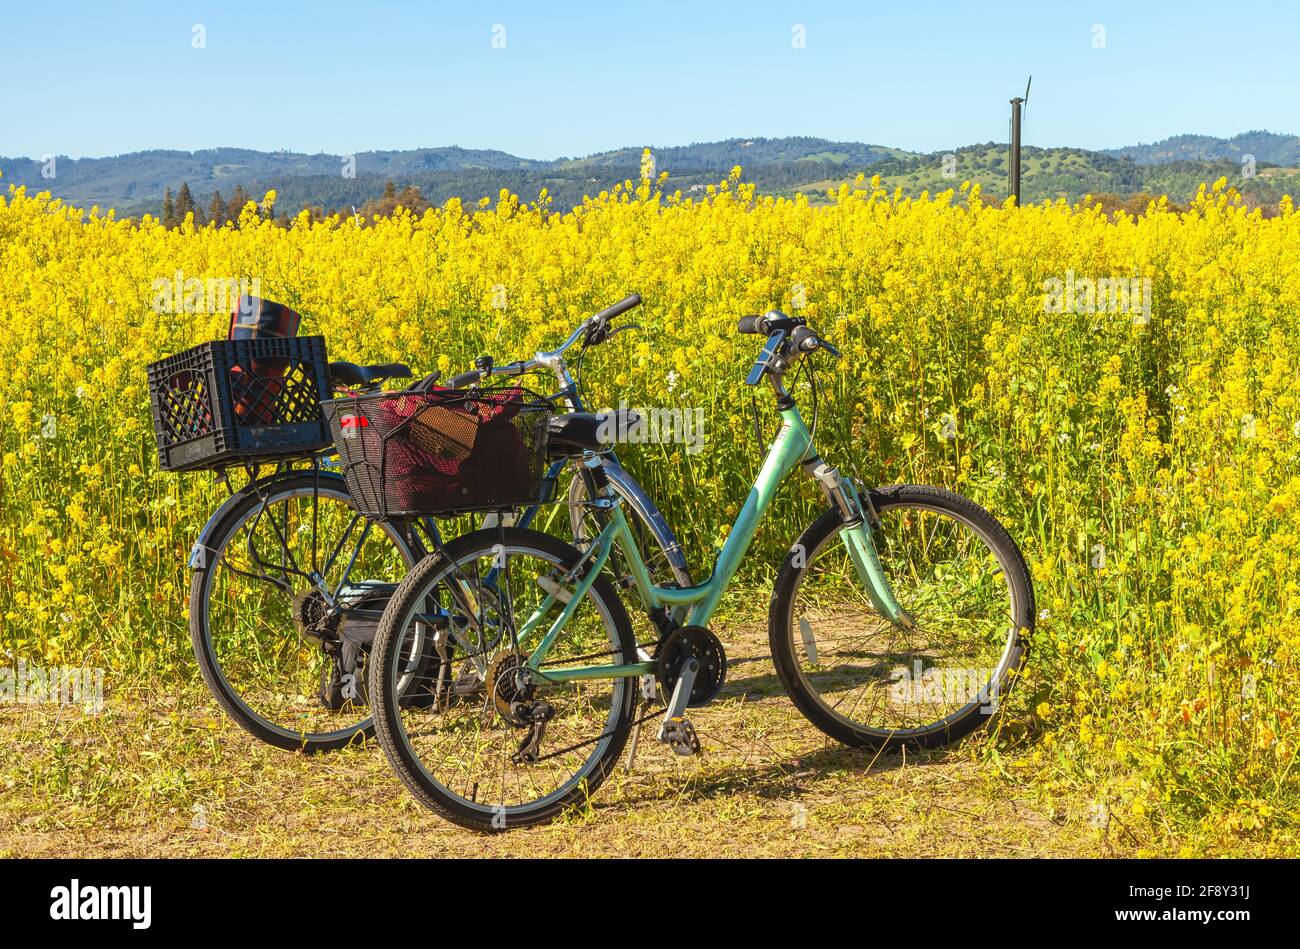 Two bicycle at the blooming field mustard flowers in early spring, Napa Valley, California, USA. Stock Photo